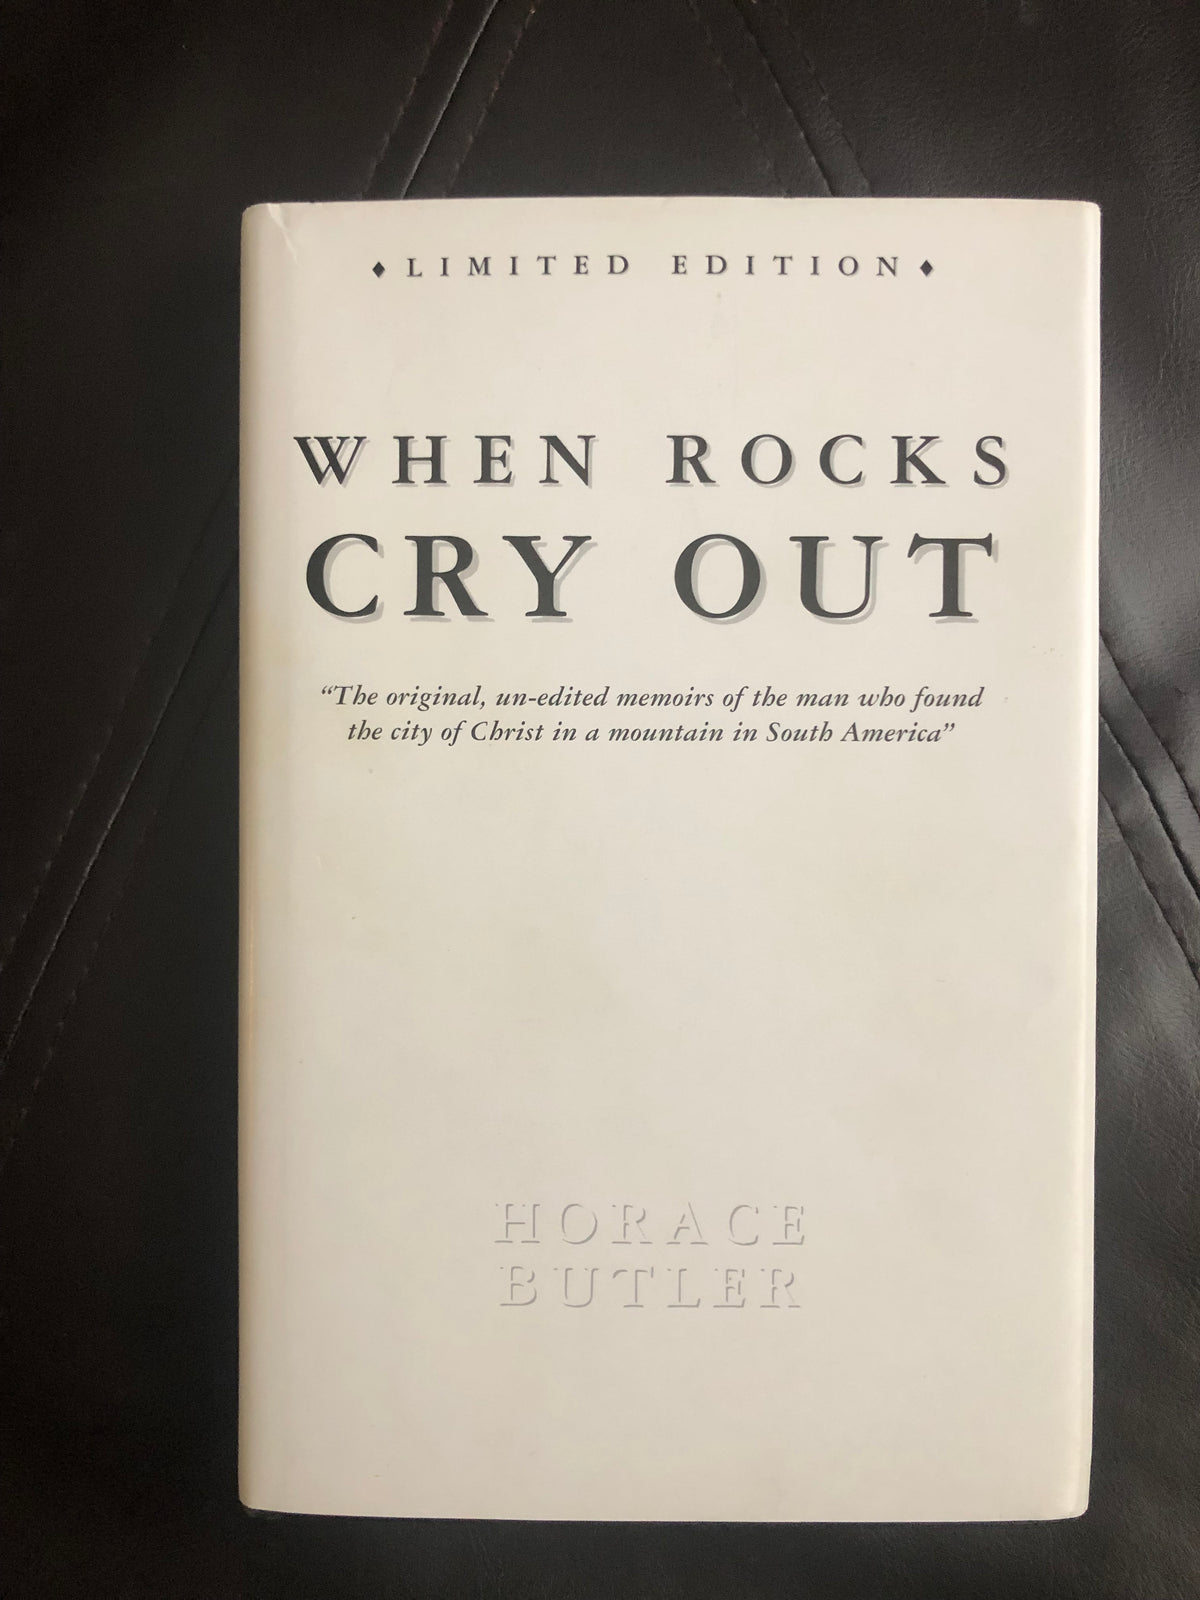 When Rocks Cry Out by Horace Butler (HARDCOVER First Edition!)